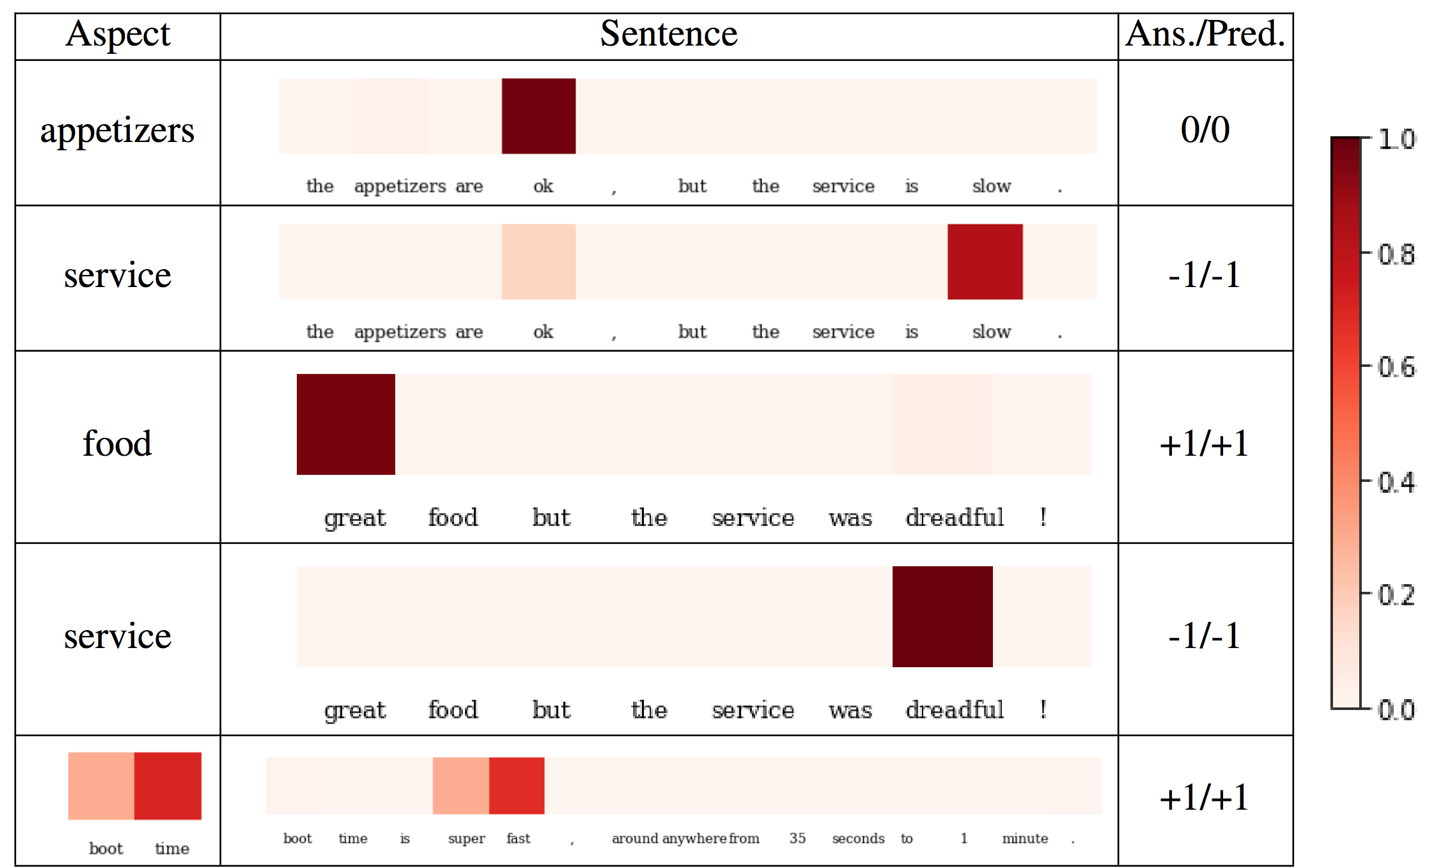 Aspect Level weights for Sentences